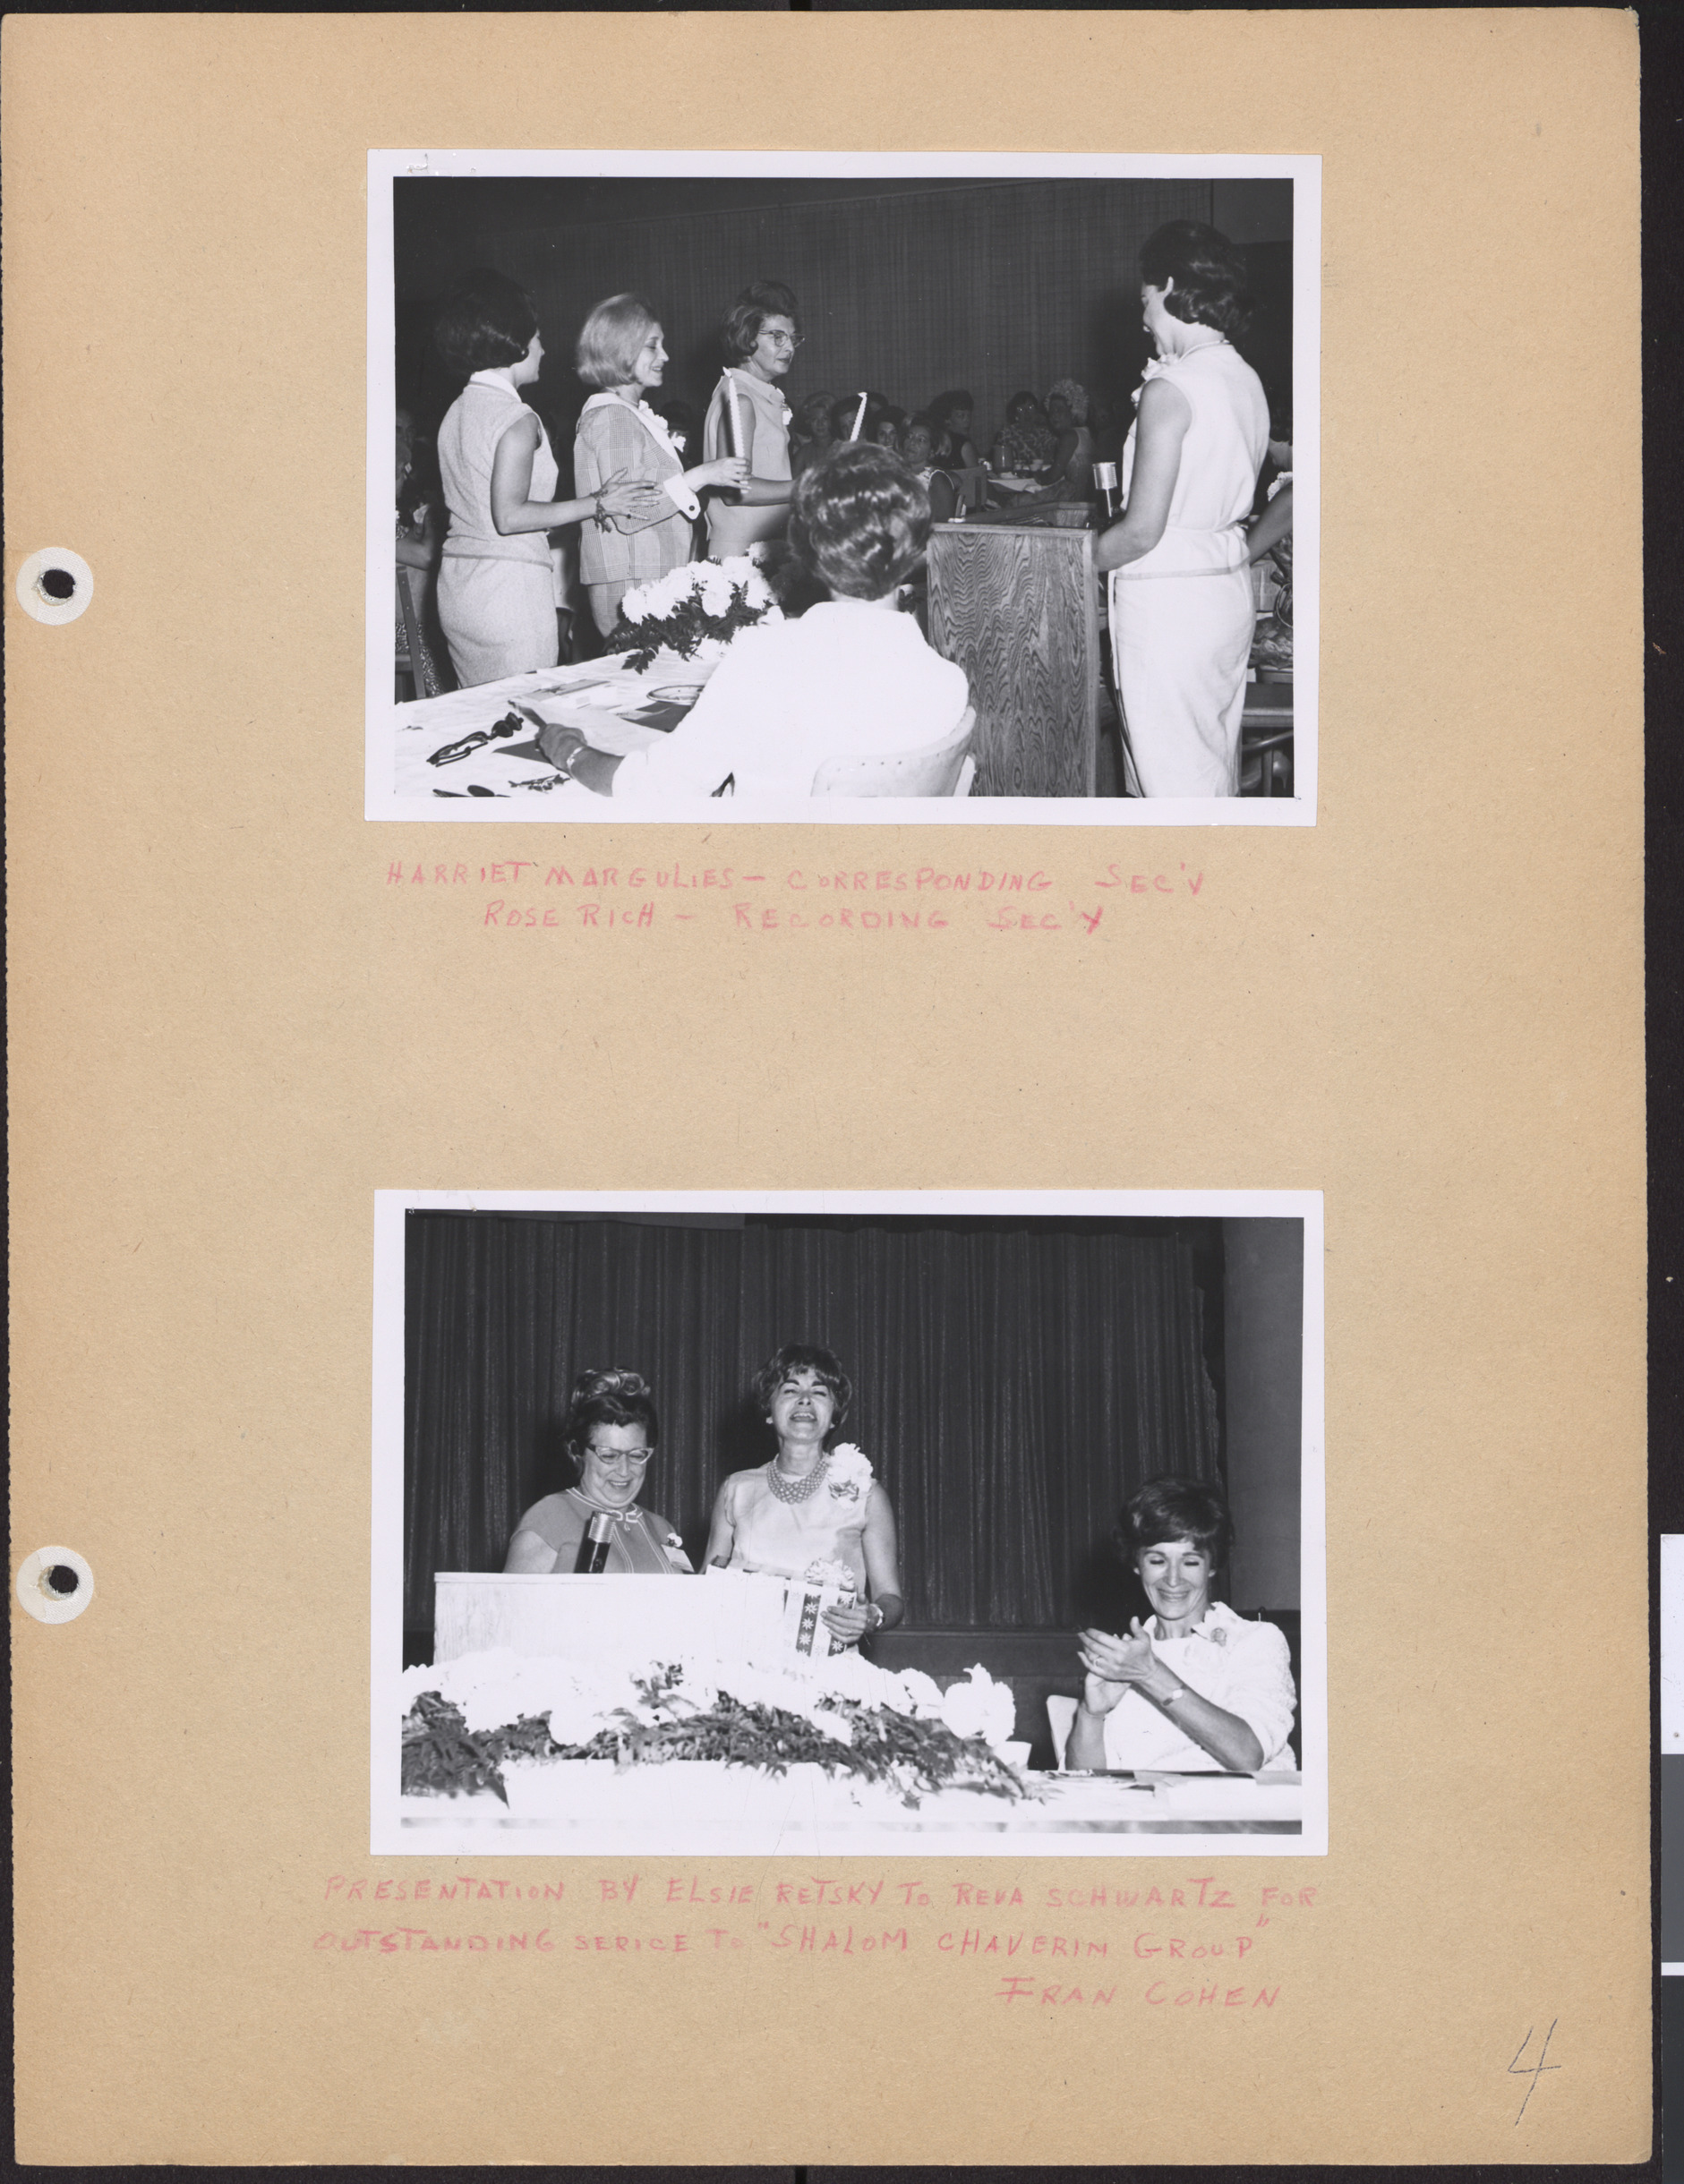 Photograph of Harriet Margulies and Rose Rich, and photograph of Elsie Restky, Reva Schwartz and Fran Cohen